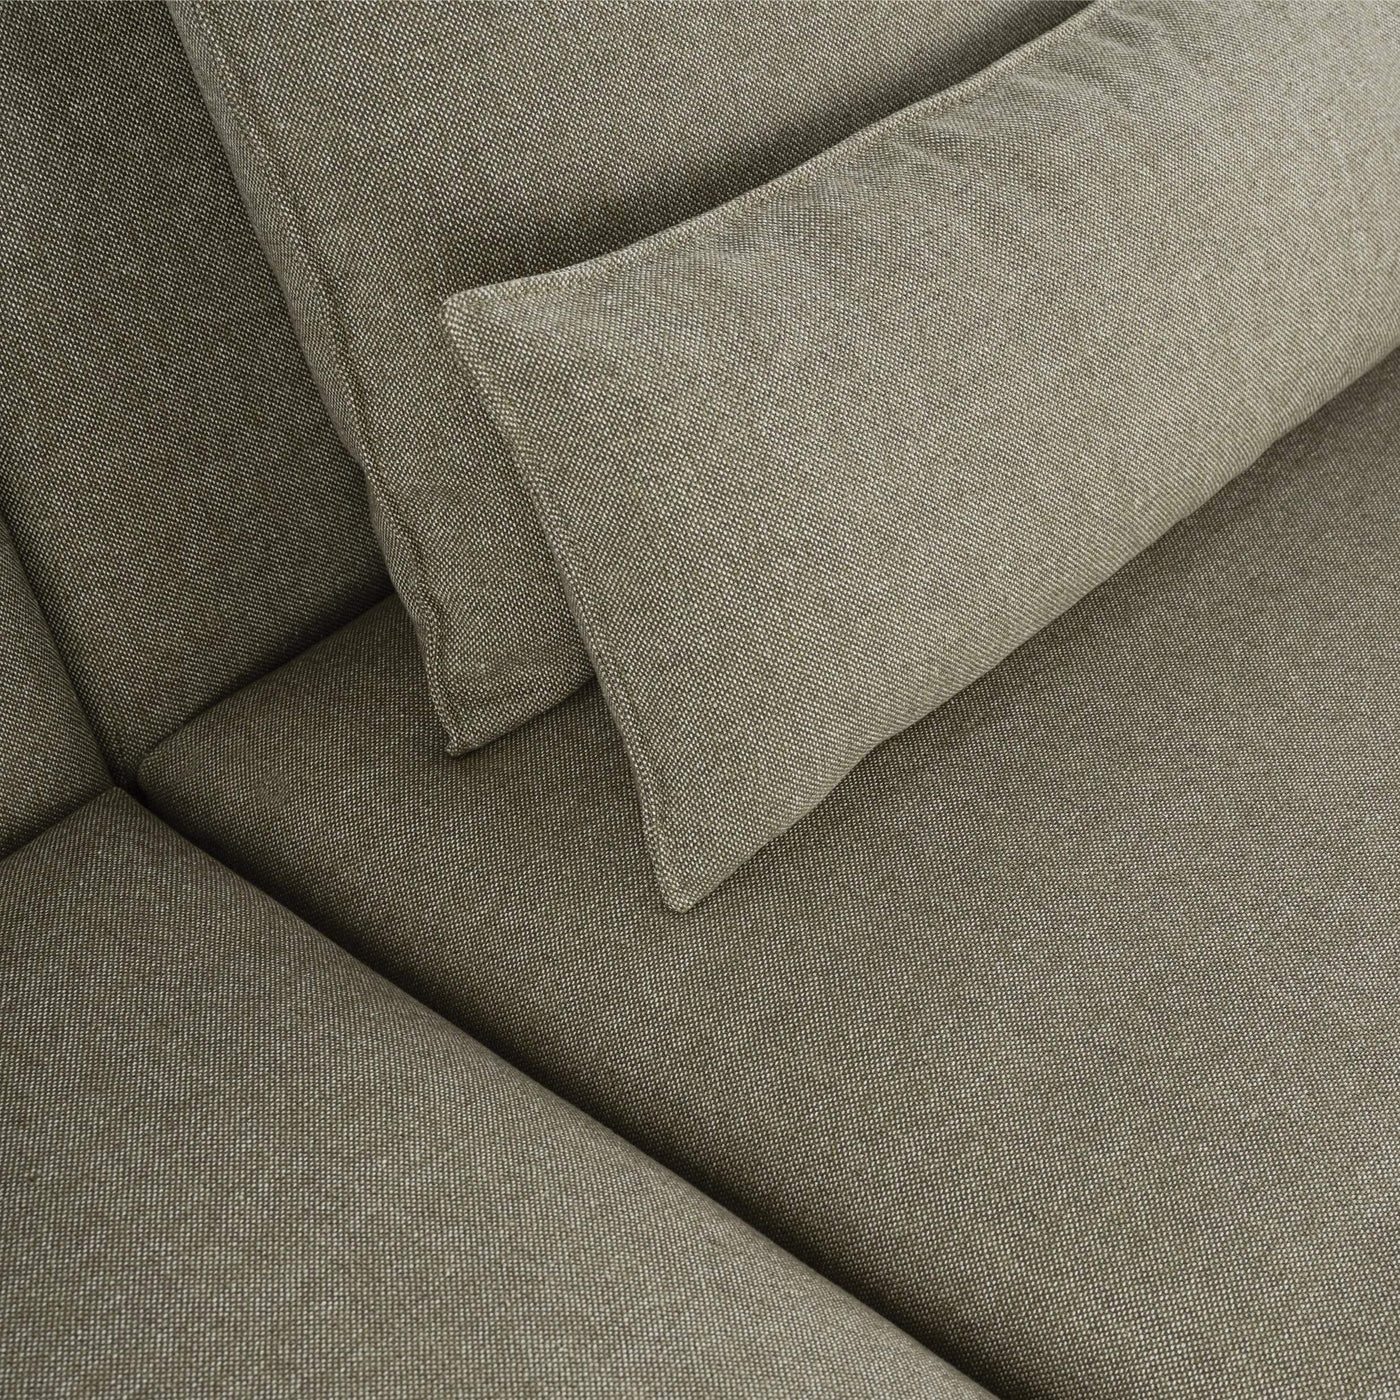 Clay 15 by Kvadrat. Natural shade upholstery linen fabric made to order for Muuto In Situ sofas. Order free fabric swatches at someday designs. 